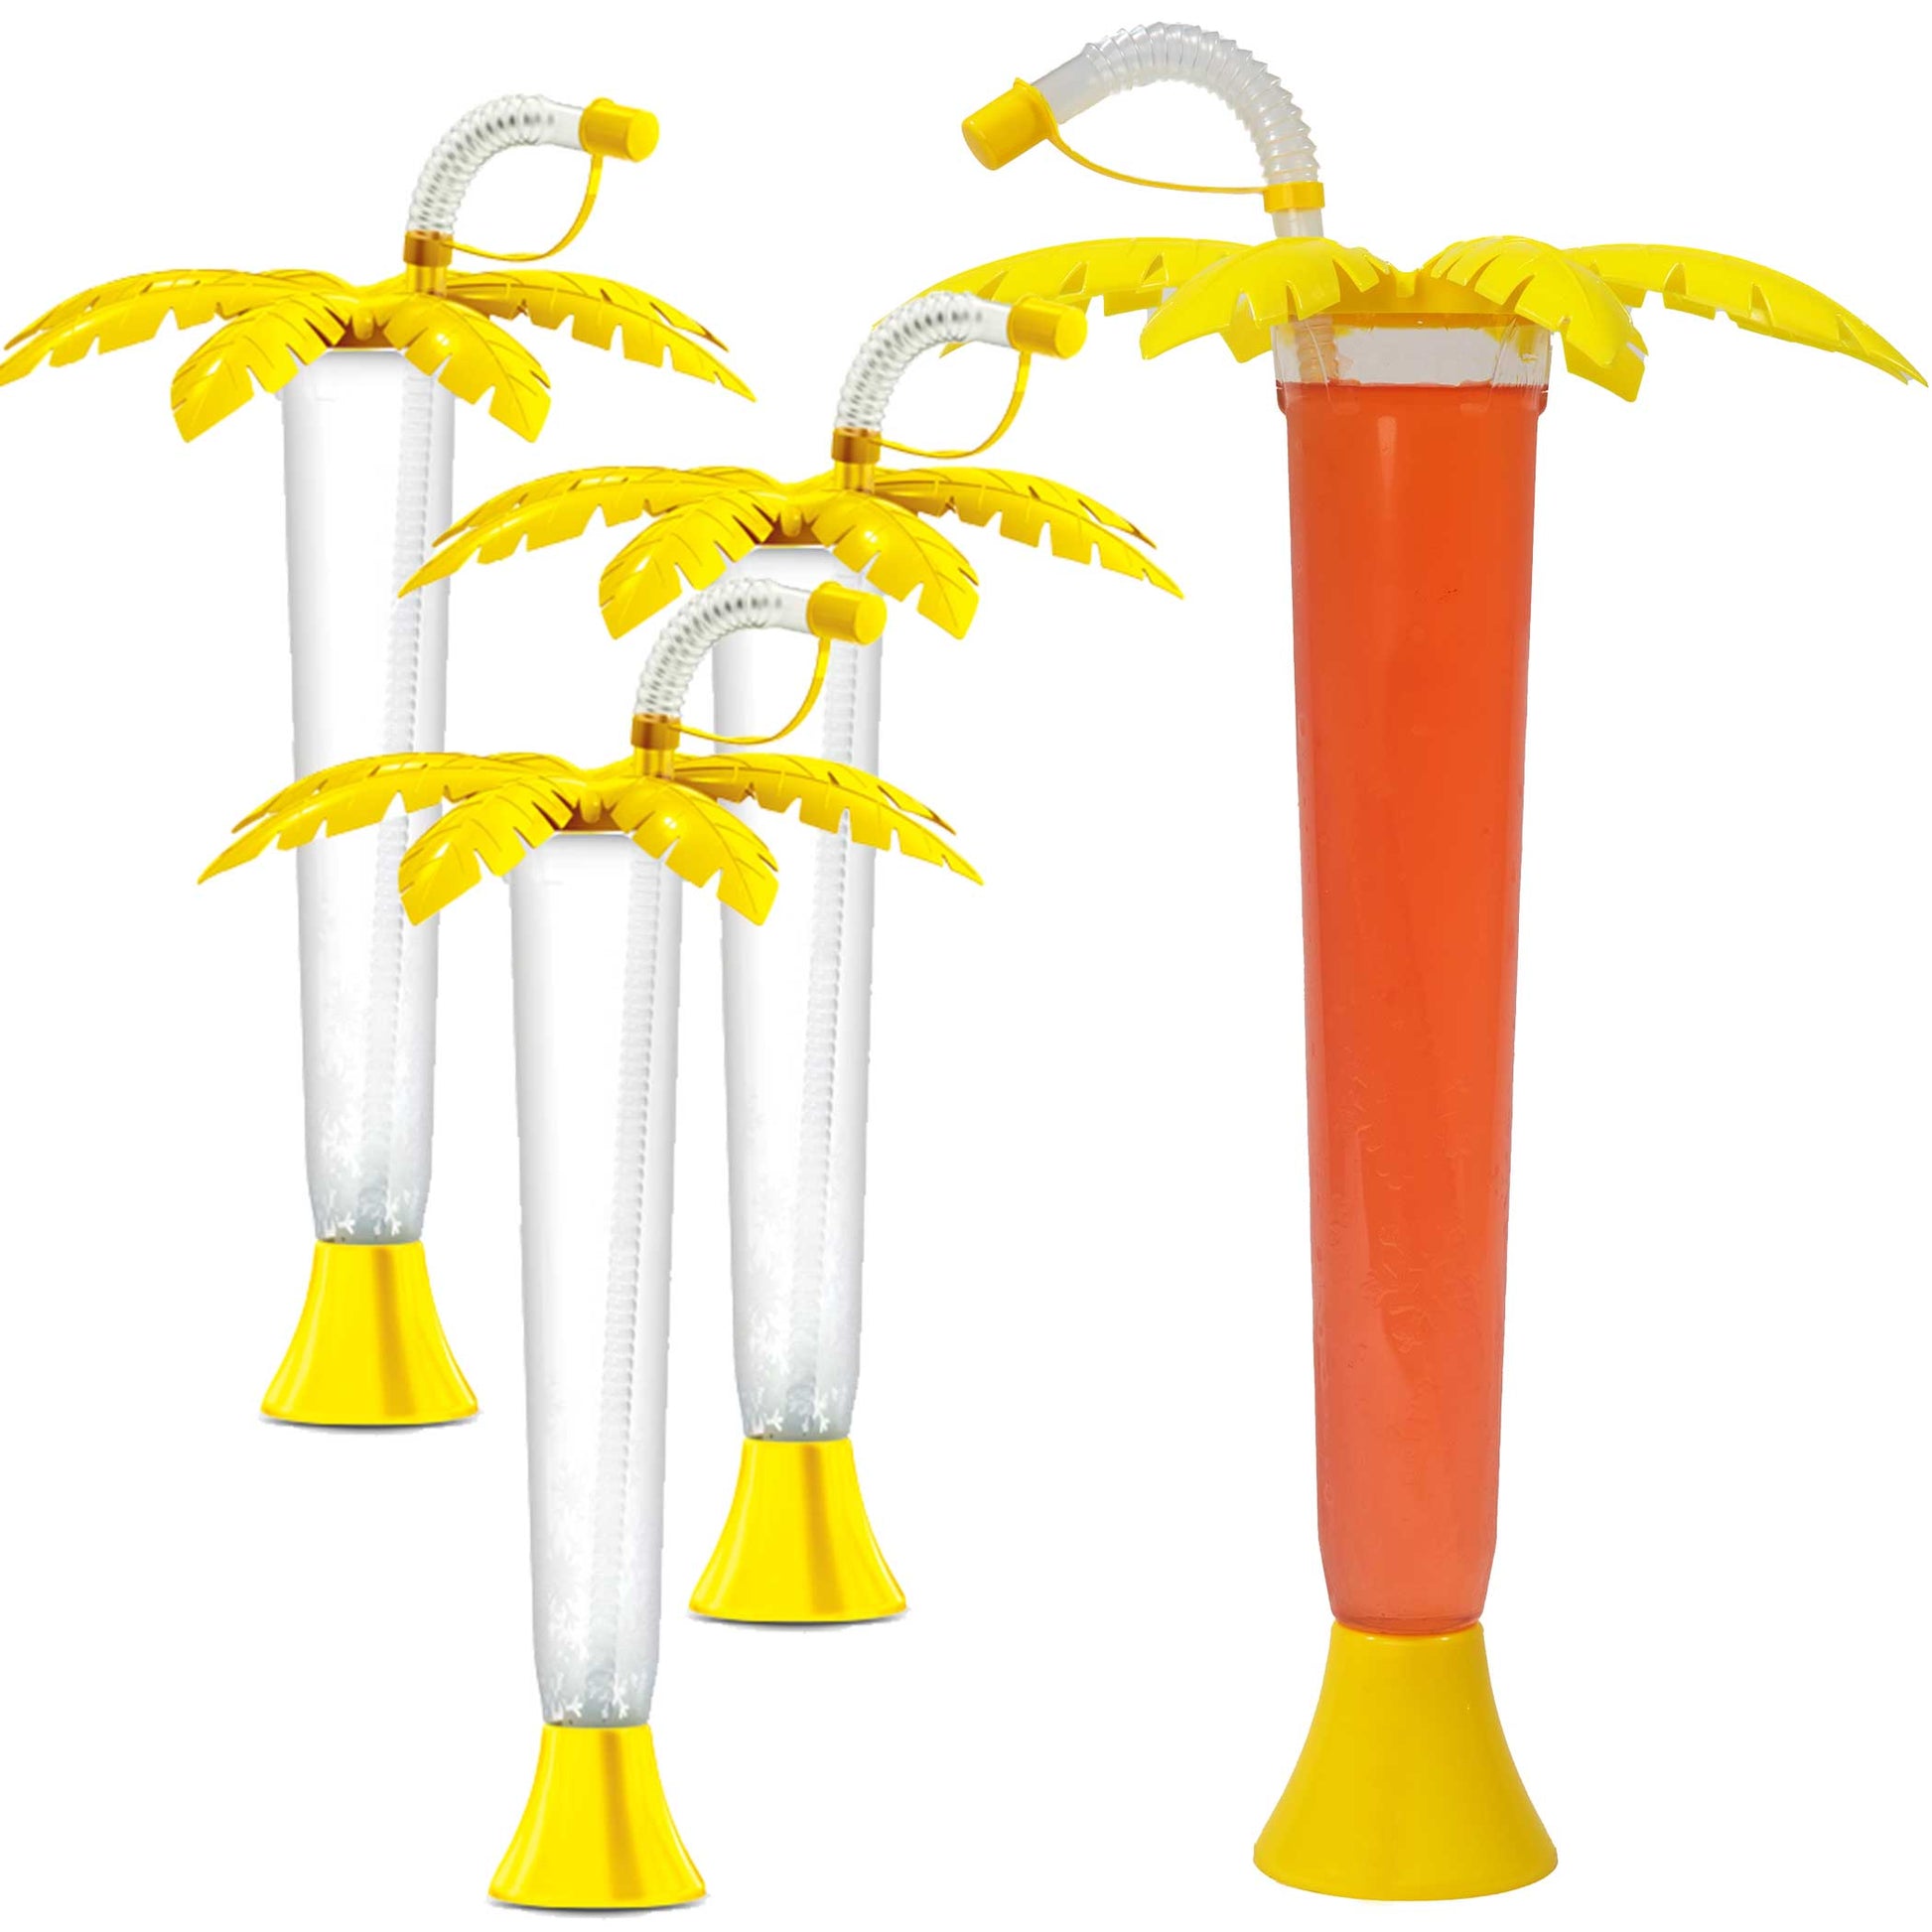 https://noveltycupsusa.com/cdn/shop/files/sweet-world-usa-yard-cups-108-palm-tree-luau-yard-cups-108-cups-for-margaritas-cold-drinks-frozen-drinks-kids-parties-14-oz-400-ml-yellow-palm-sw-47118f-cups-with-lids-and-straws-3552.jpg?v=1684775855&width=1946